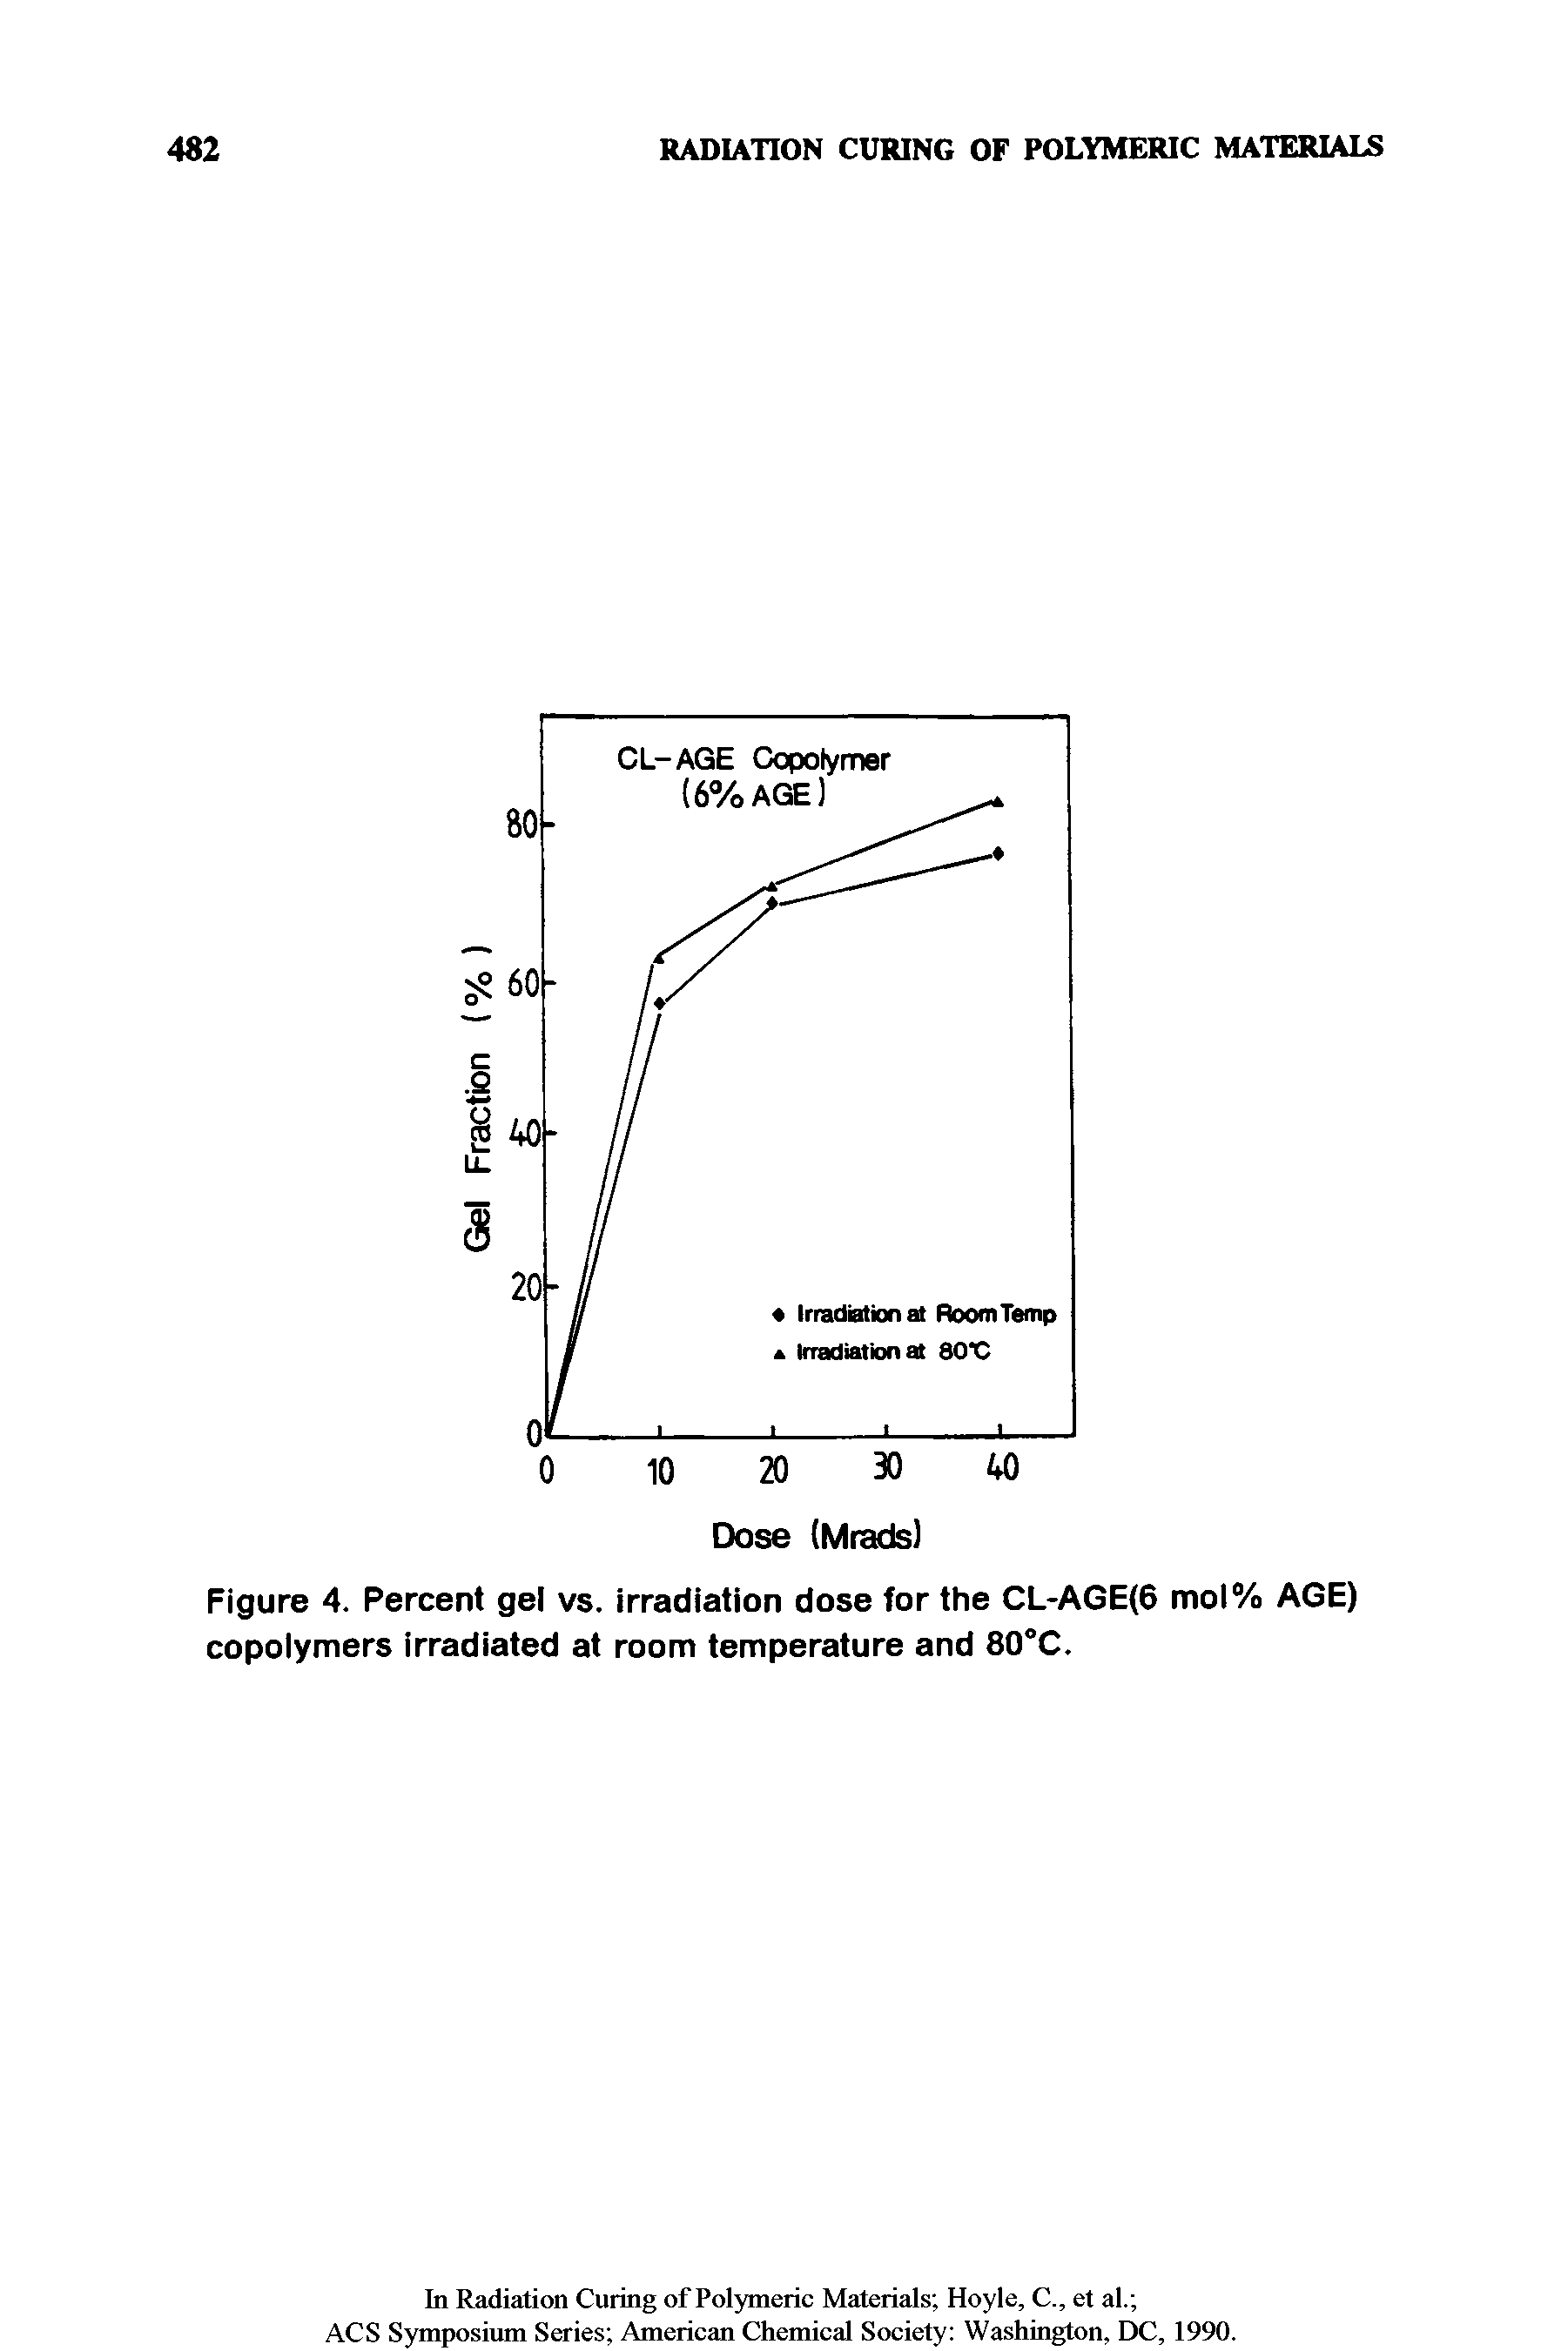 Figure 4. Percent gel vs. irradiation dose for the CL-AGE(6 mol% AGE) copolymers irradiated at room temperature and SO C.